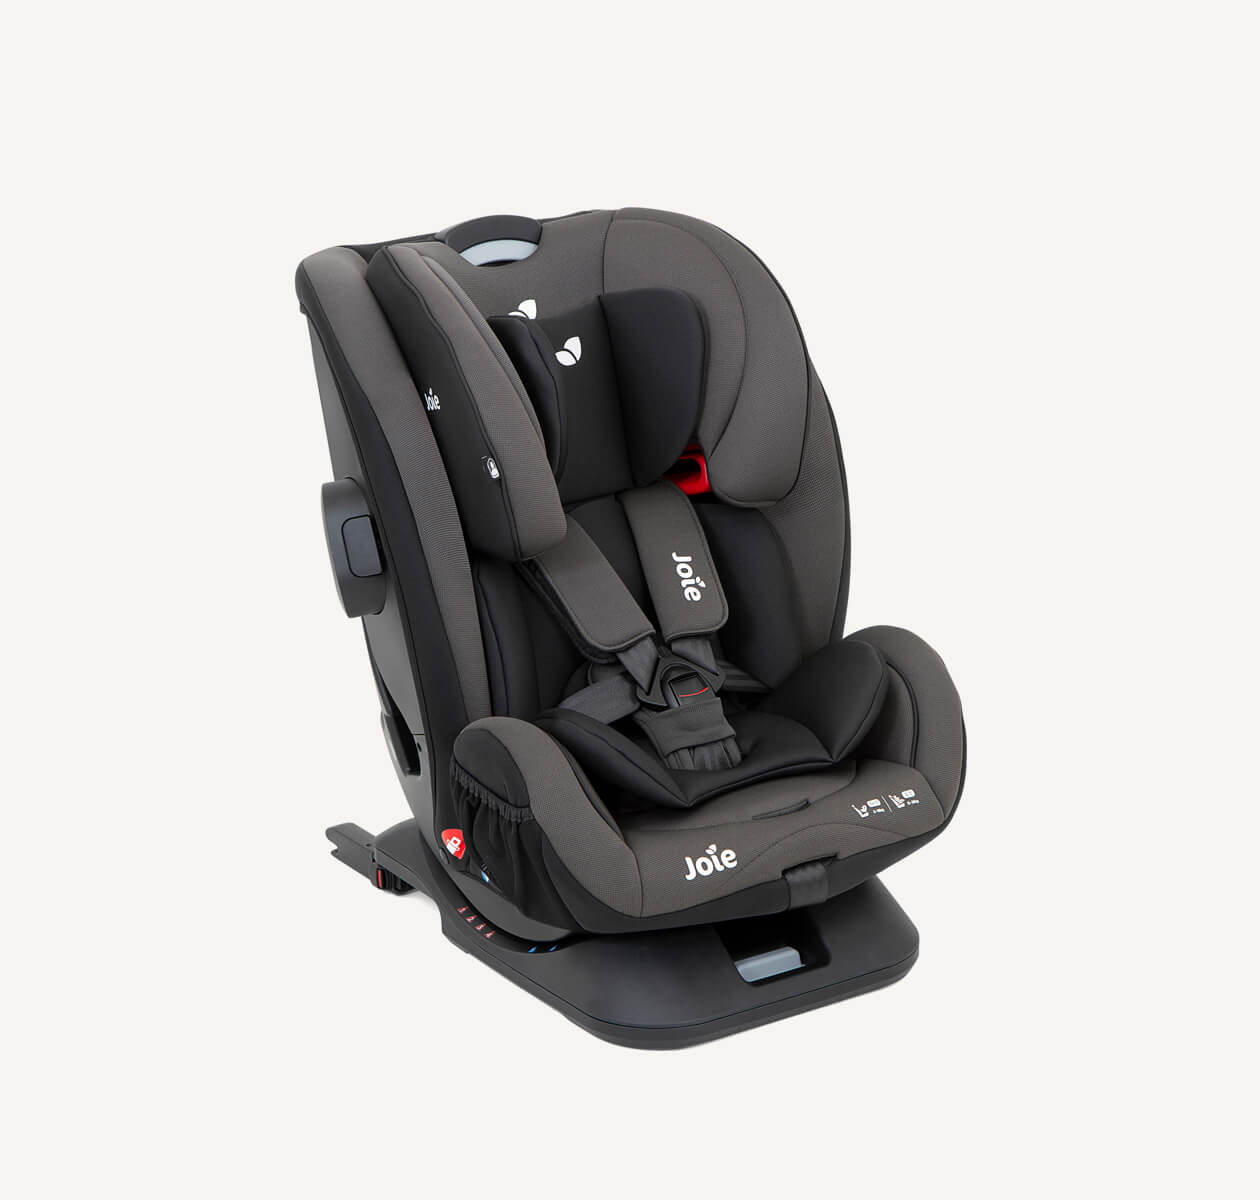  Dark gray Joie verso booster car seat positioned at a right angle with infant inserts included.